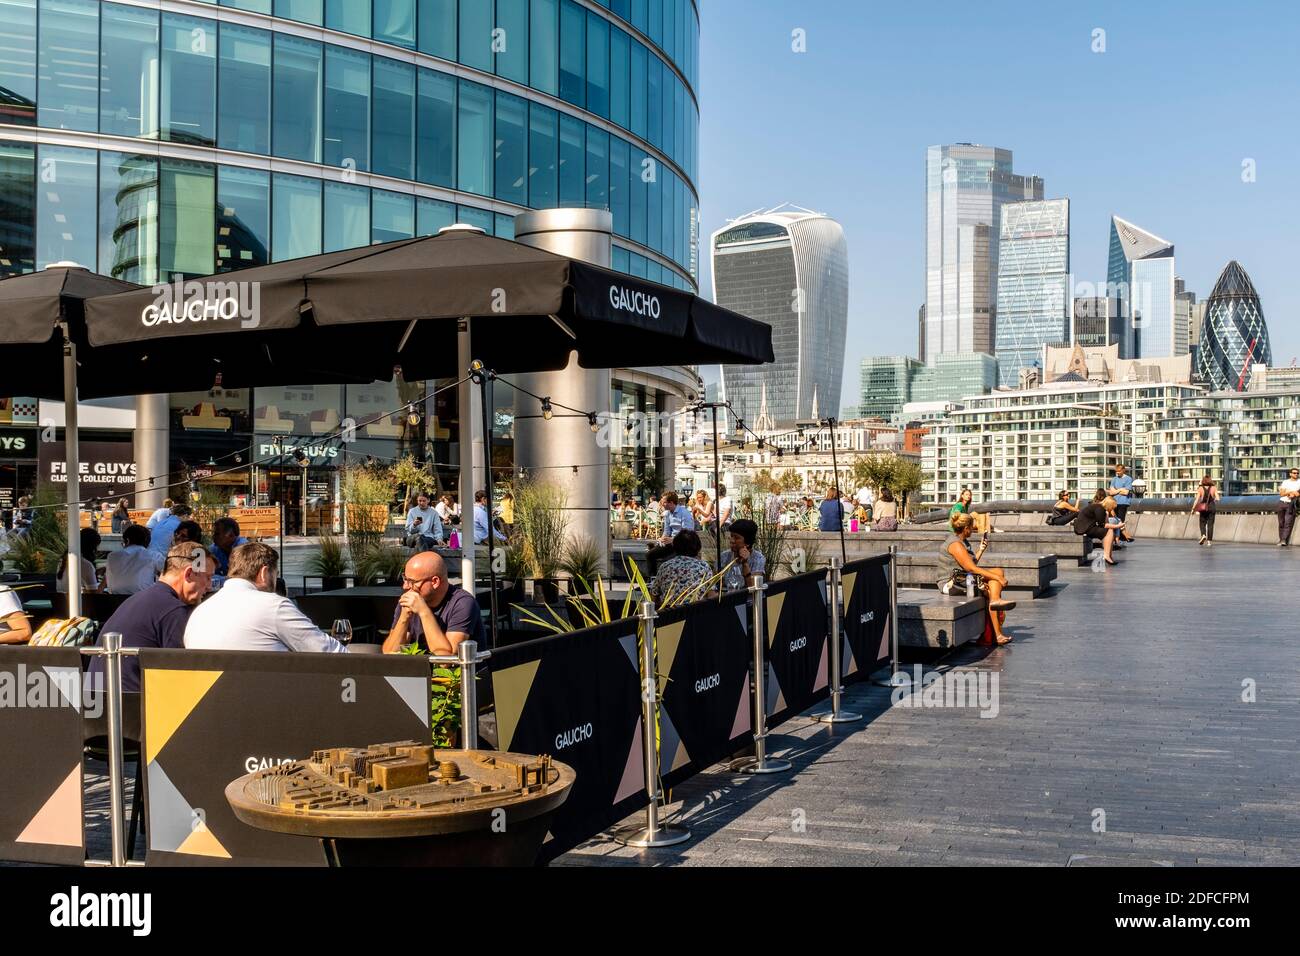 People Eating Outdoors At The Gaucho Restaurant (Tower Bridge) With The City Of London In The Backround, London Bridge City Area, London, UK. Stock Photo